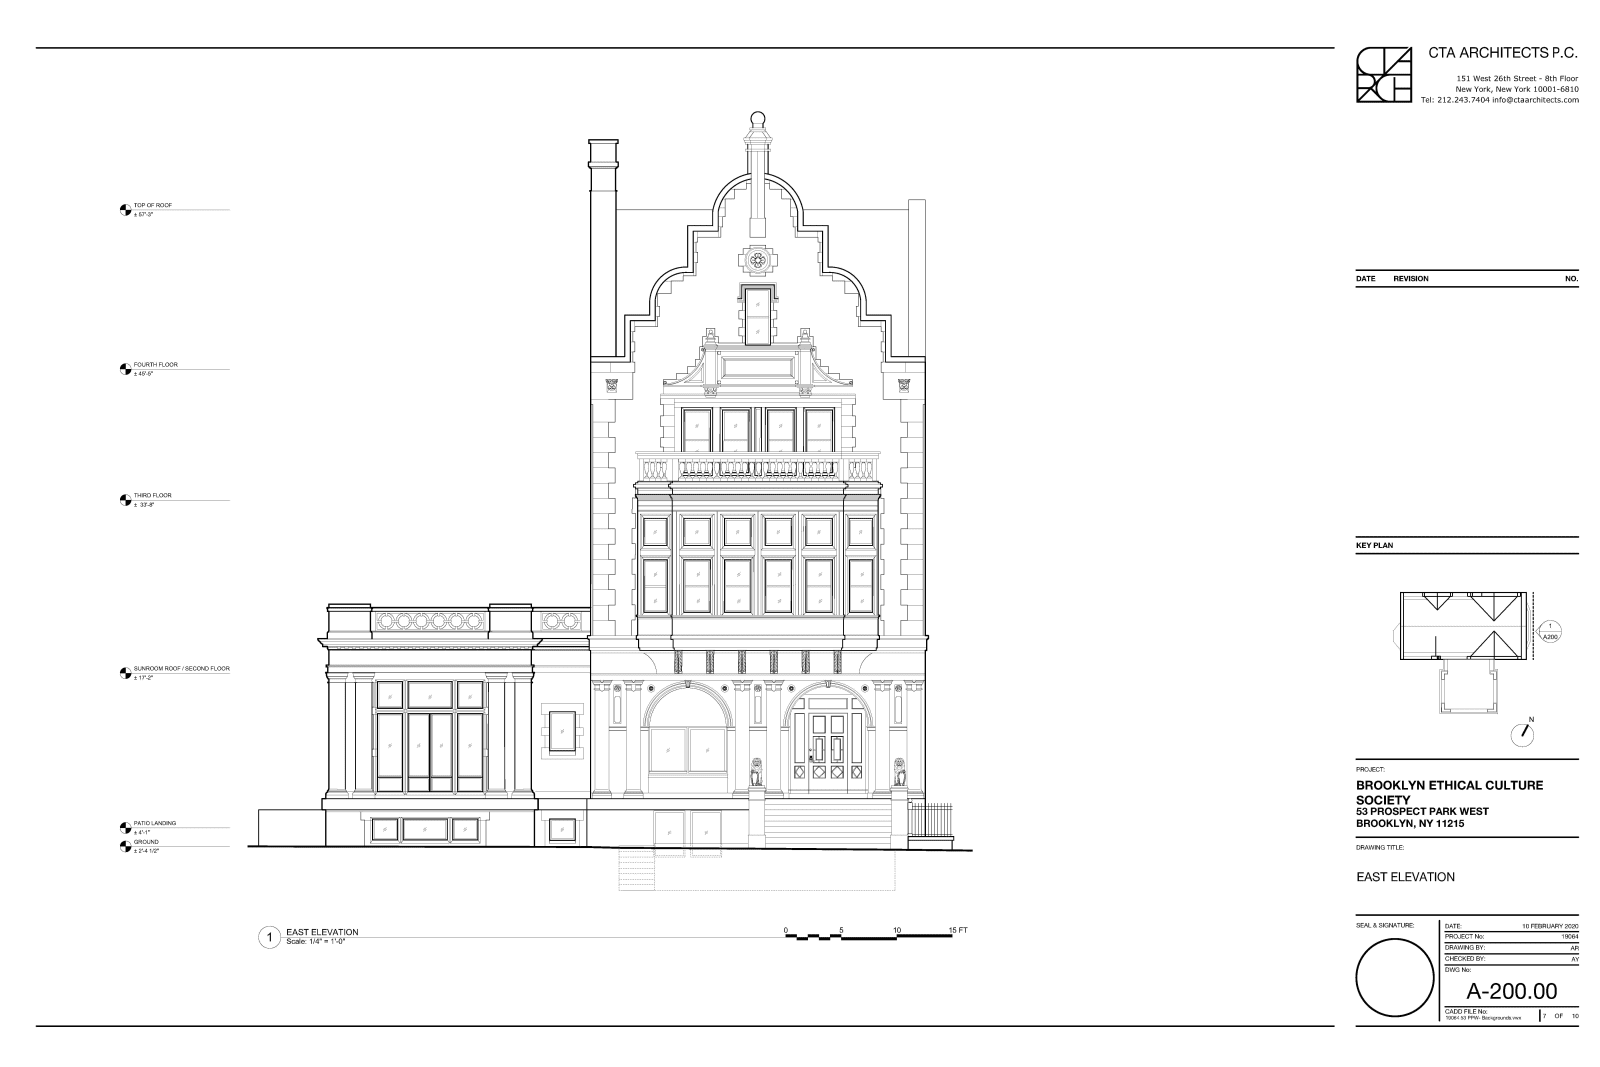 elevation for 53 prospect park west brooklyn